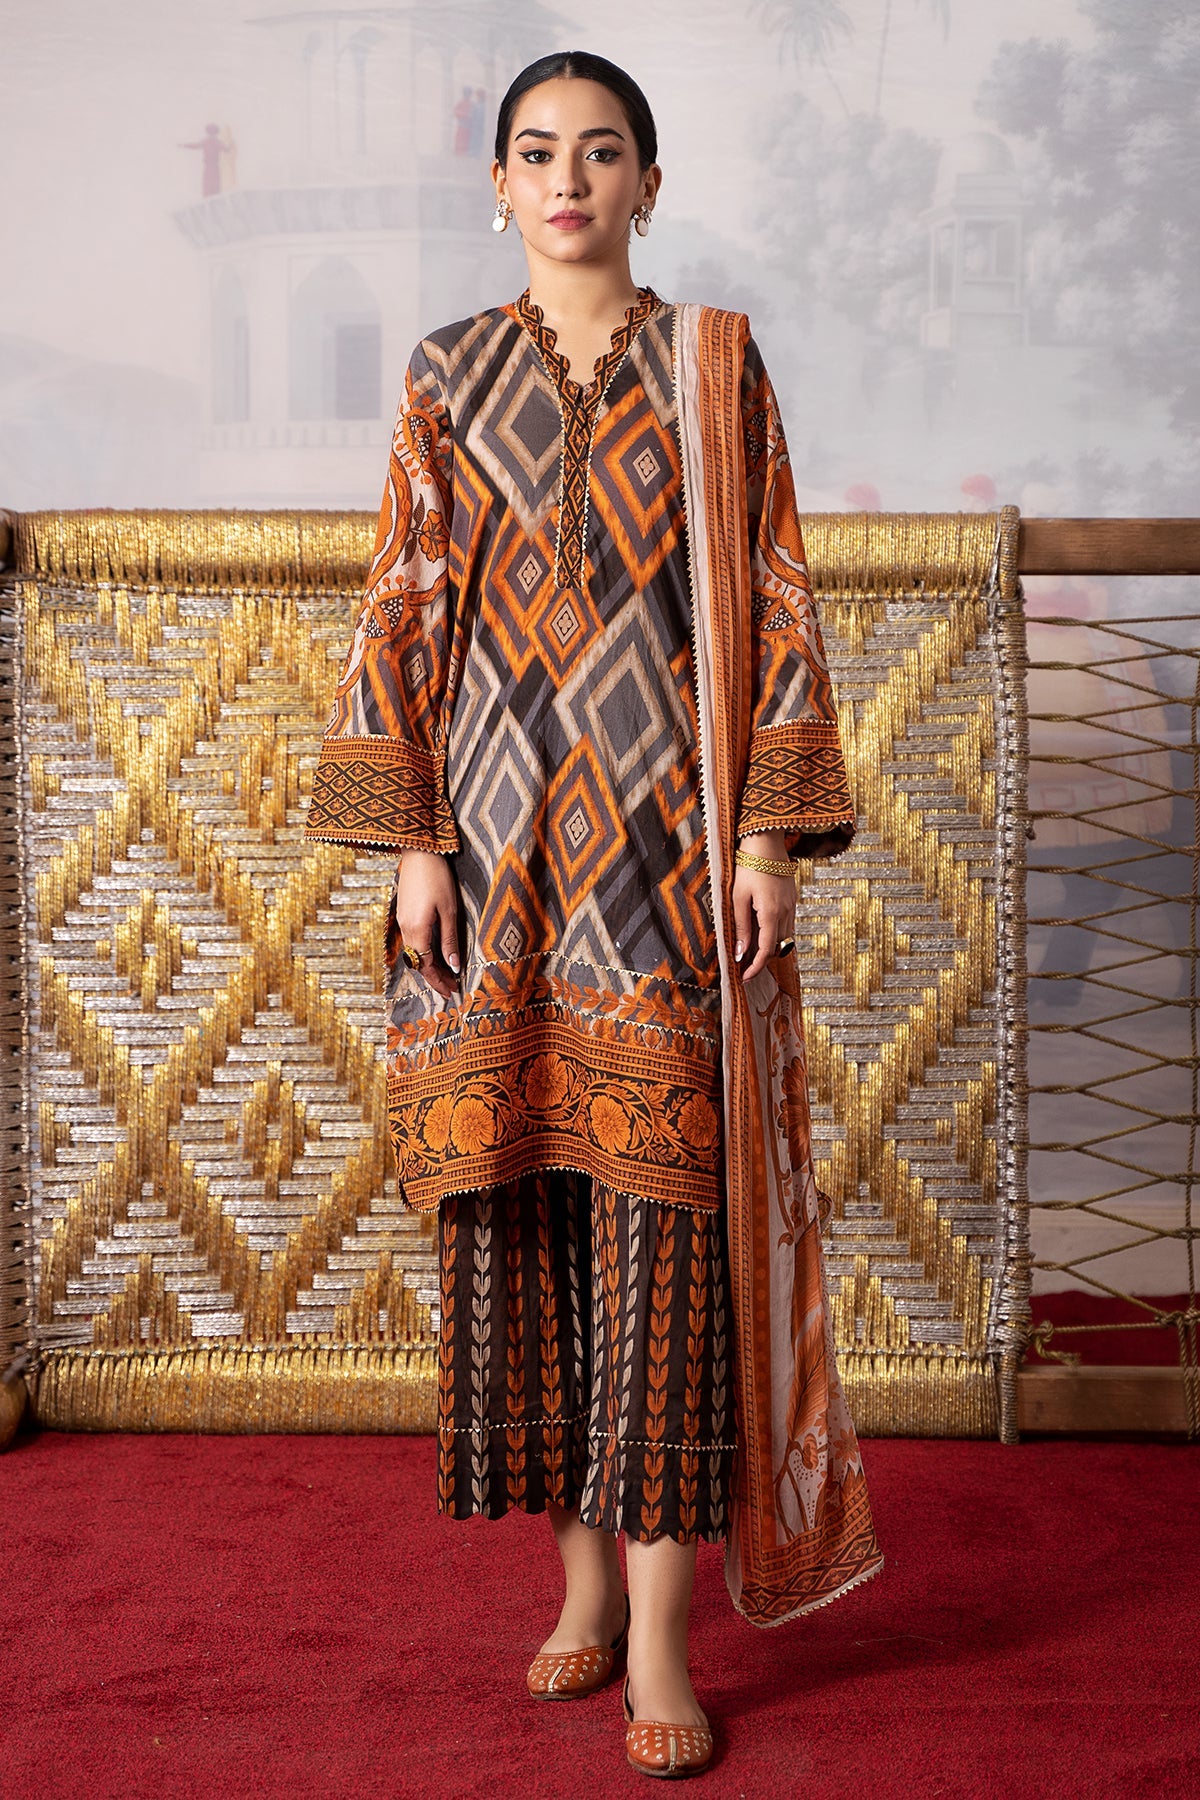 3-PC Printed Lawn Shirt with Chiffon Dupatta and Trouser CPM-4-02